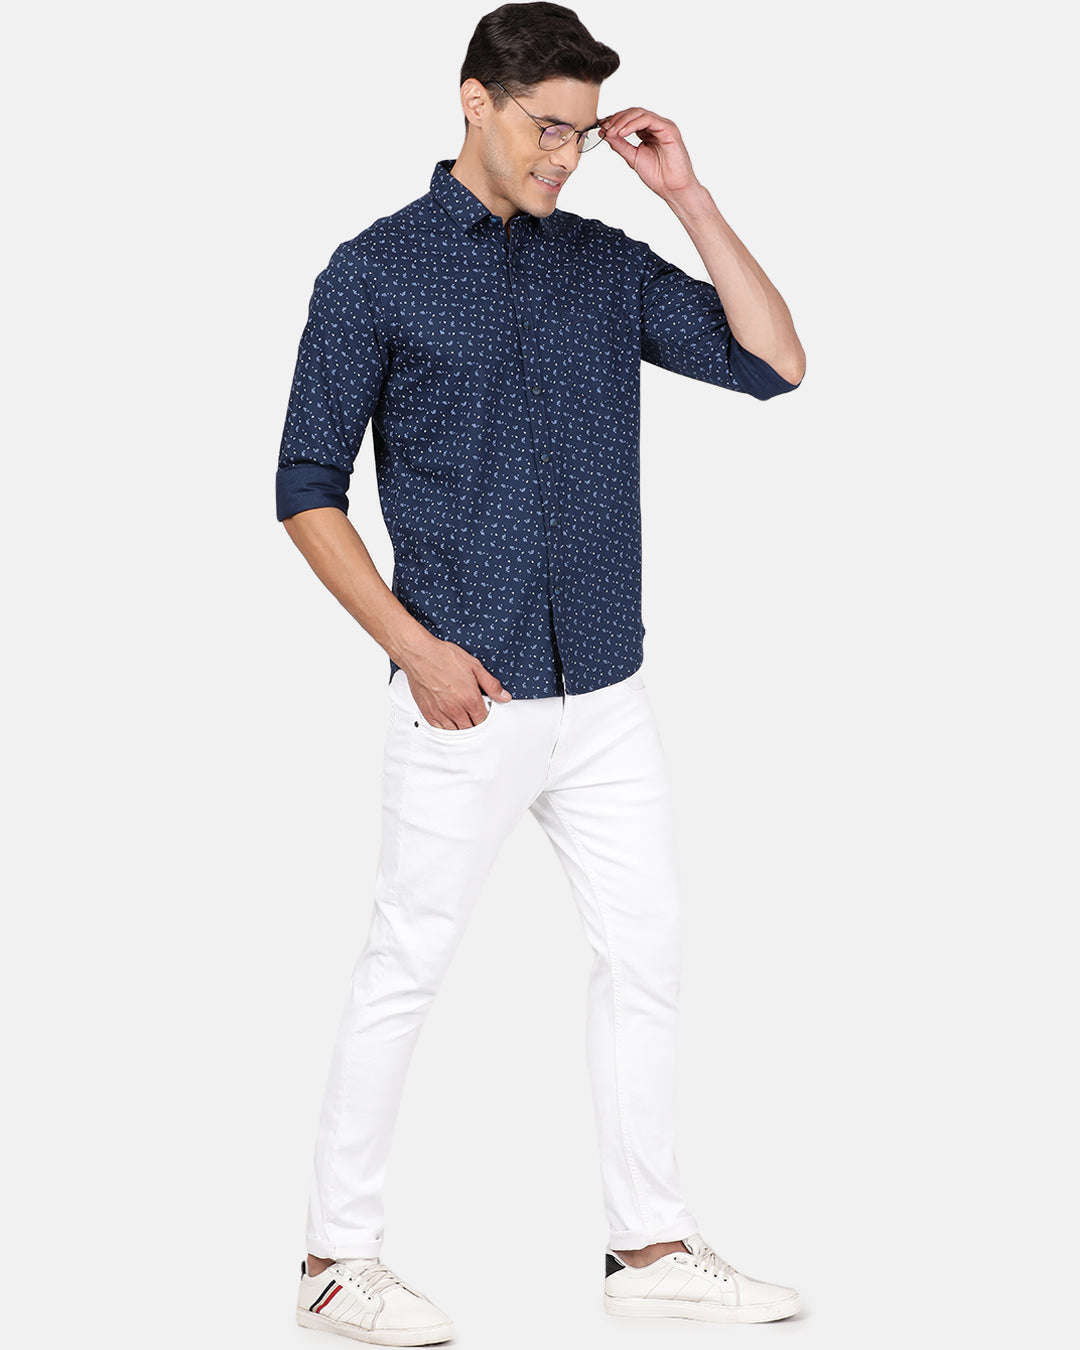 Crocodile Casual Full Sleeve Printed Navy with Collar Shirt for Men